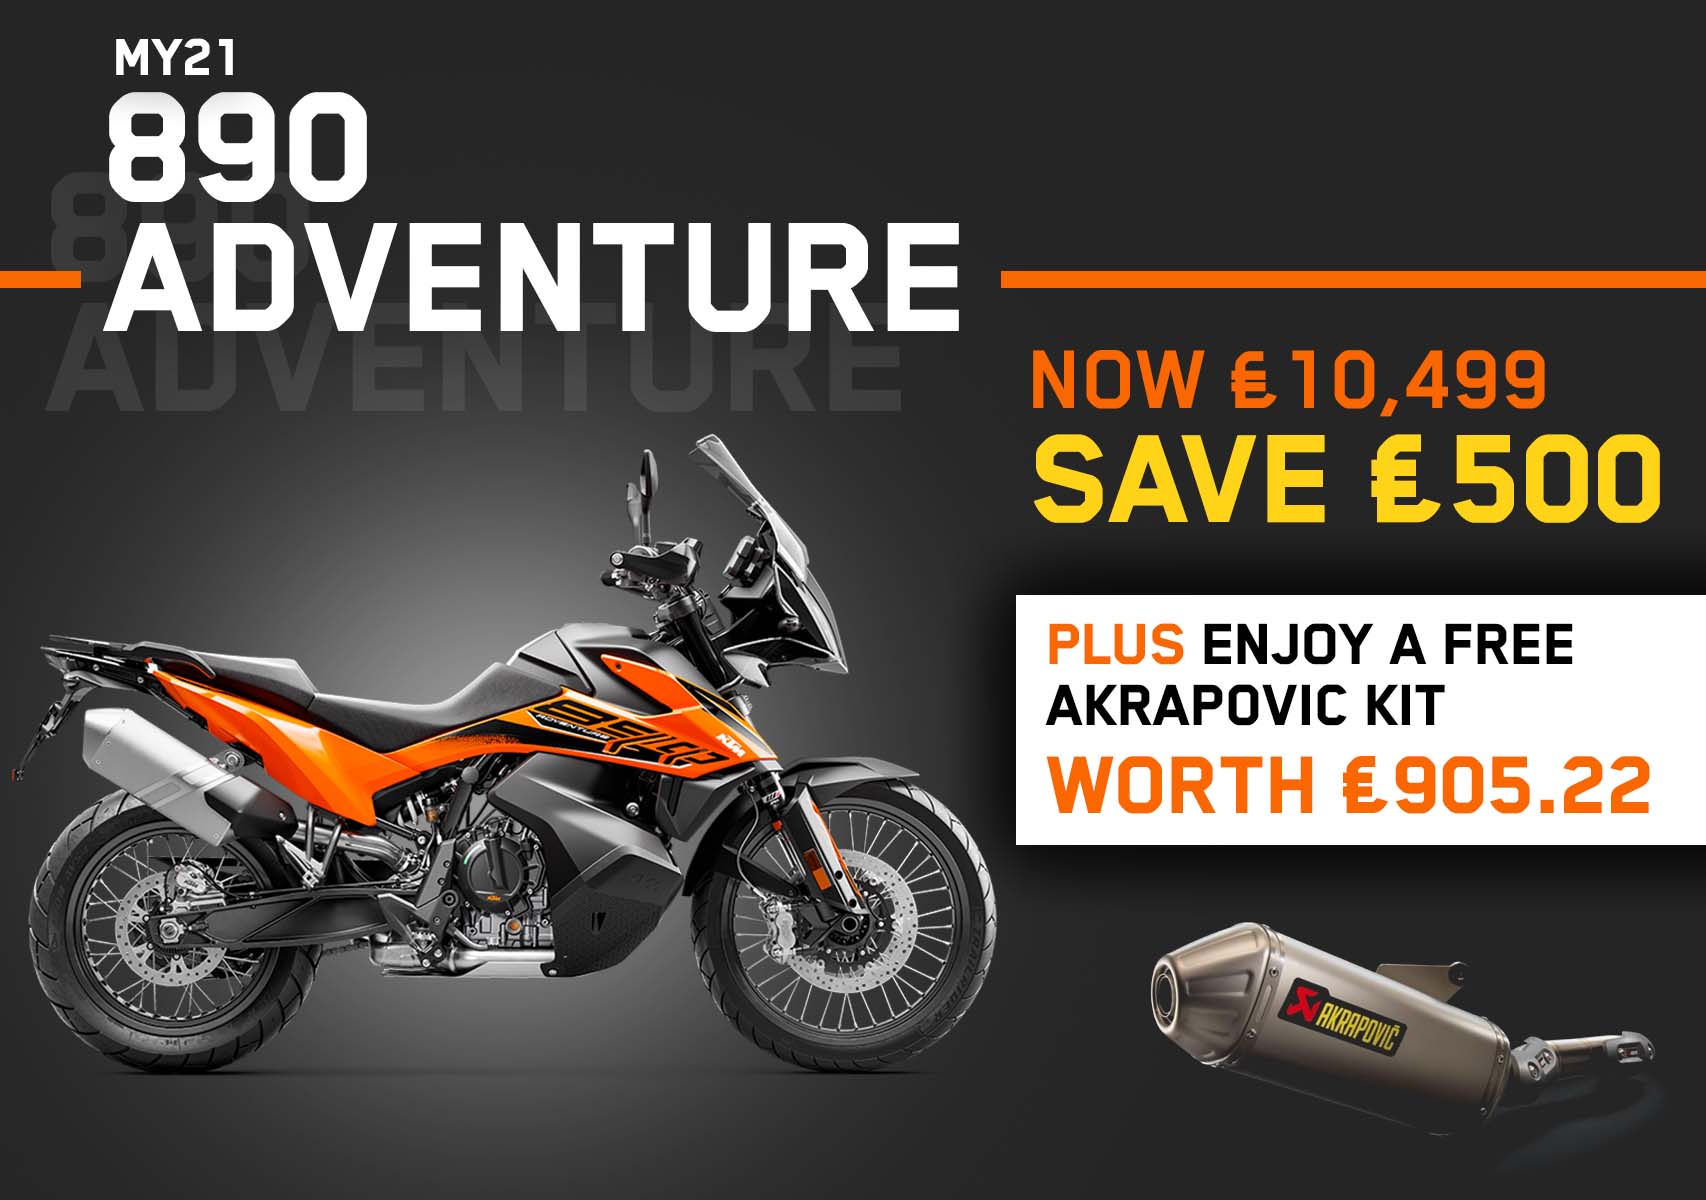 Laguna exclusive offer now available on the KTM 890 Adventure